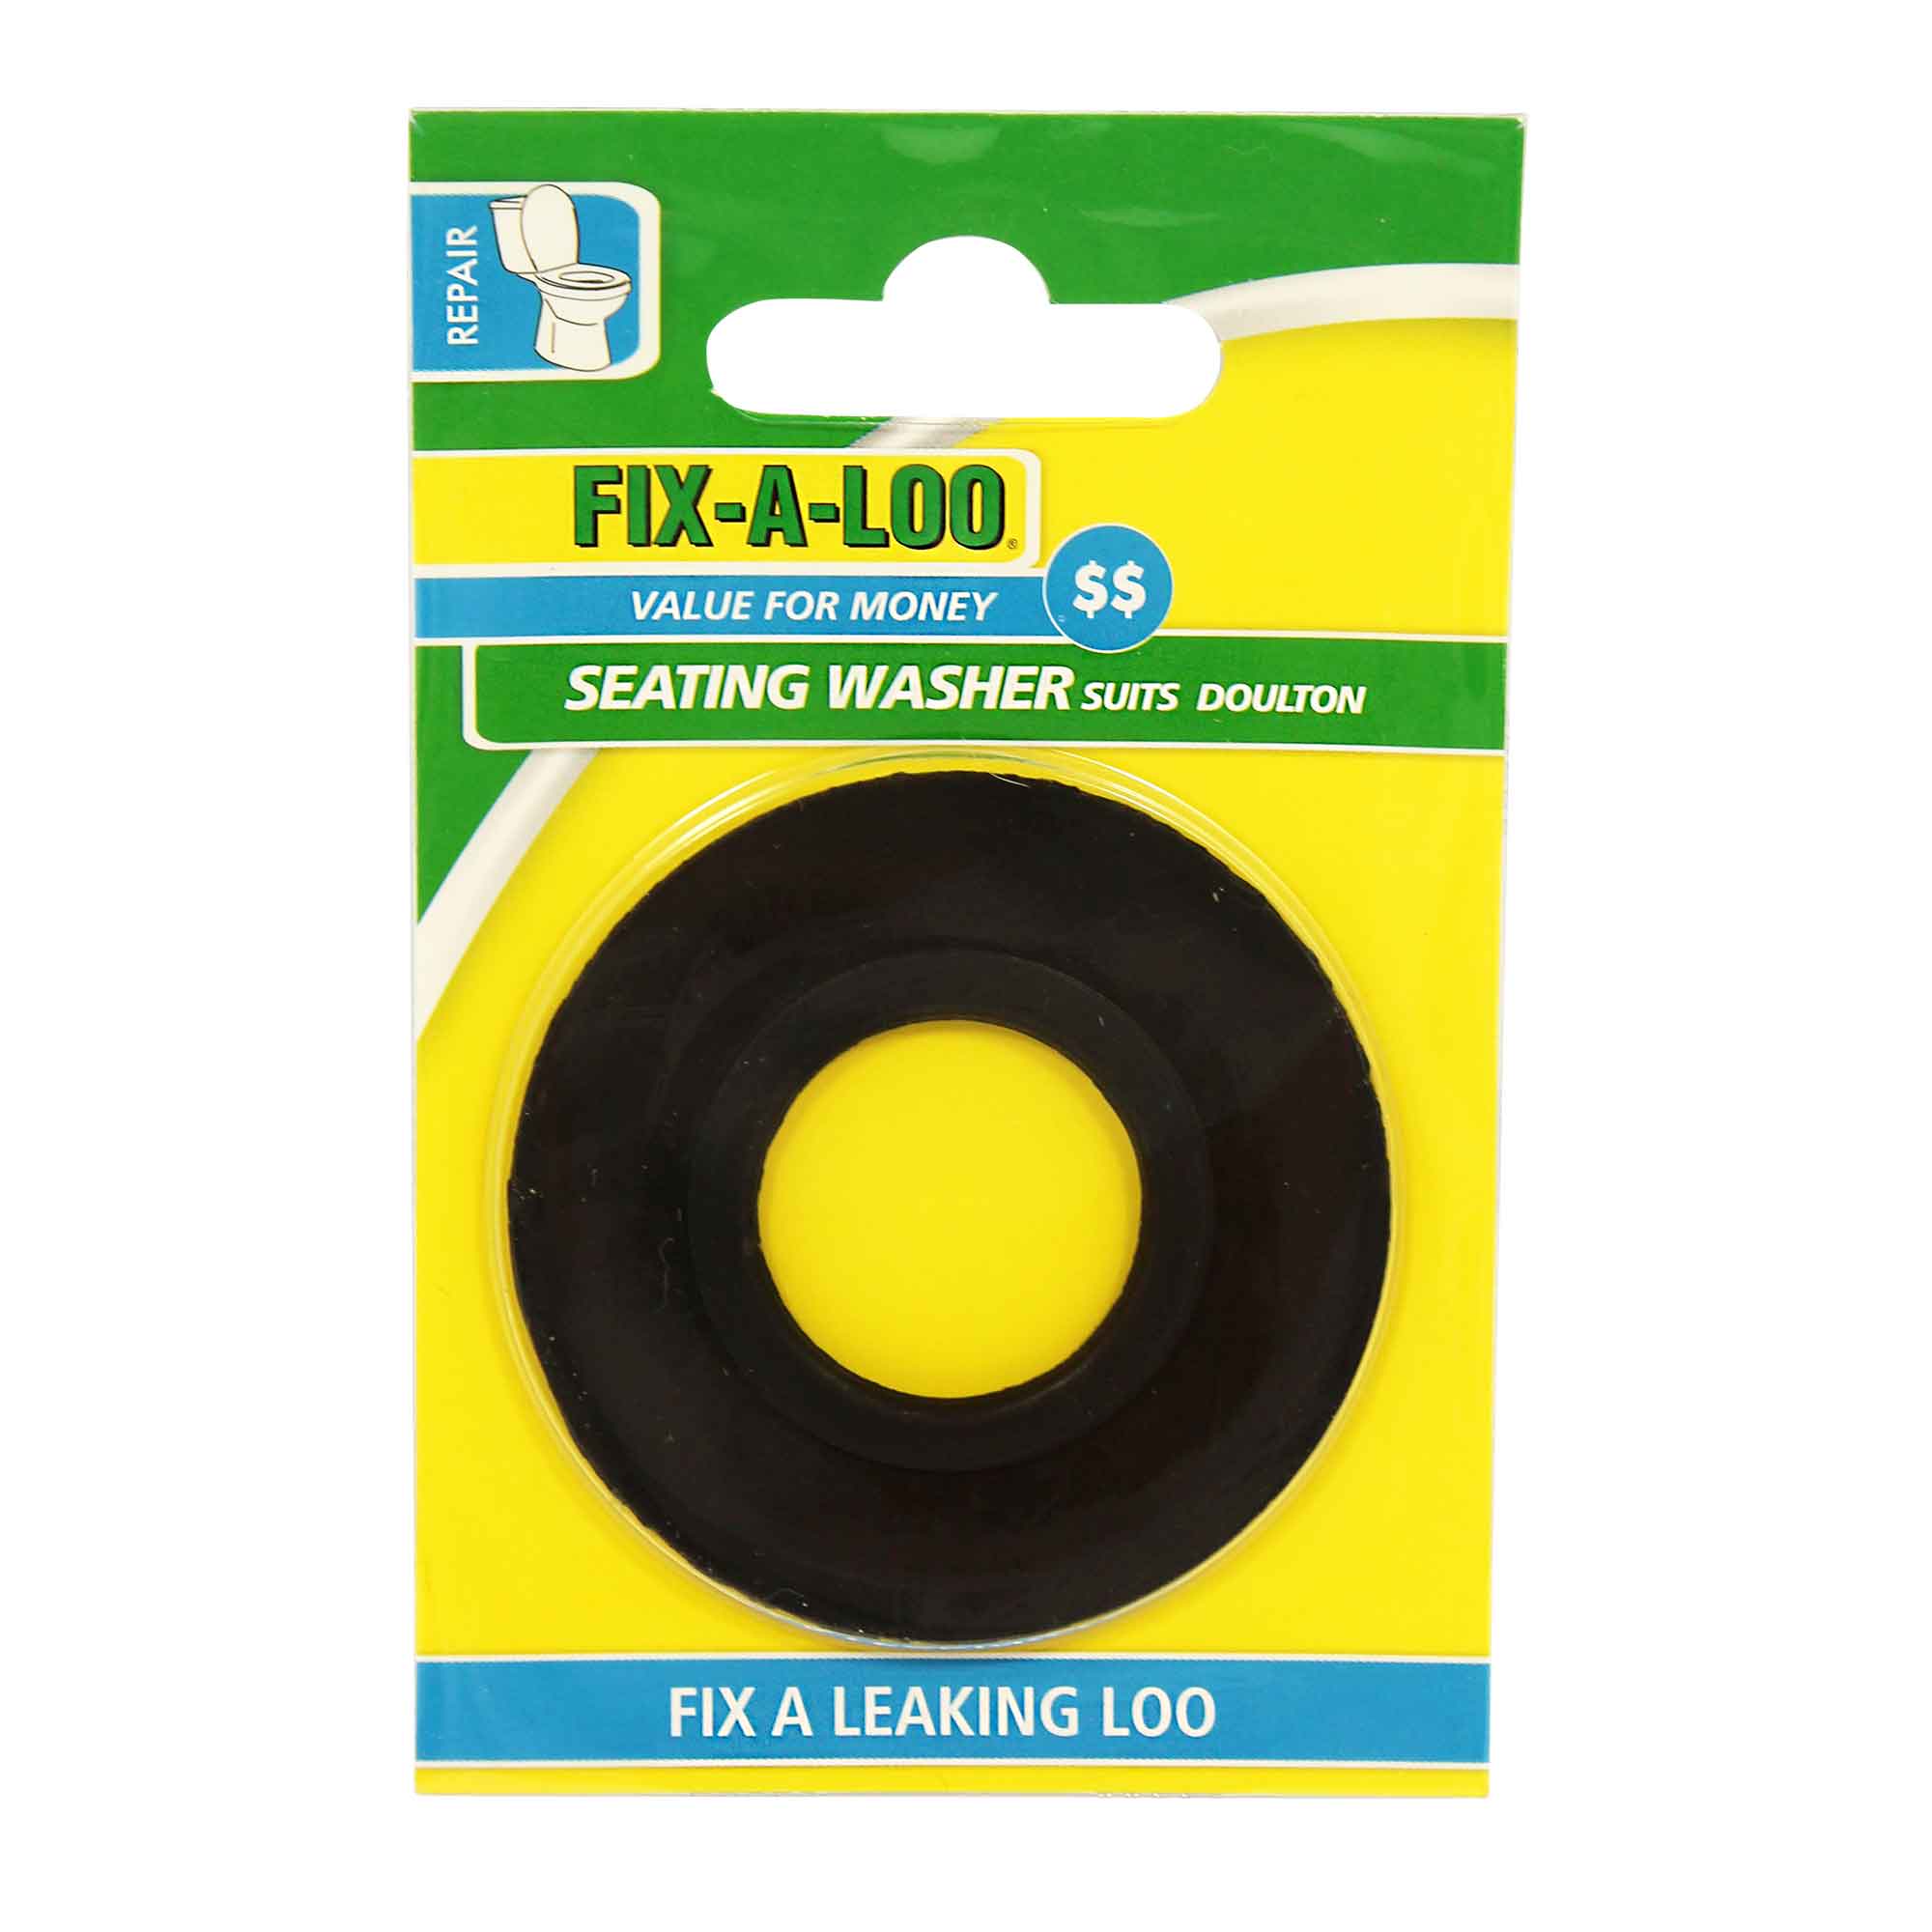 FIX-A-LOO Seating Washer Suits Doulton 226204 - Double Bay Hardware